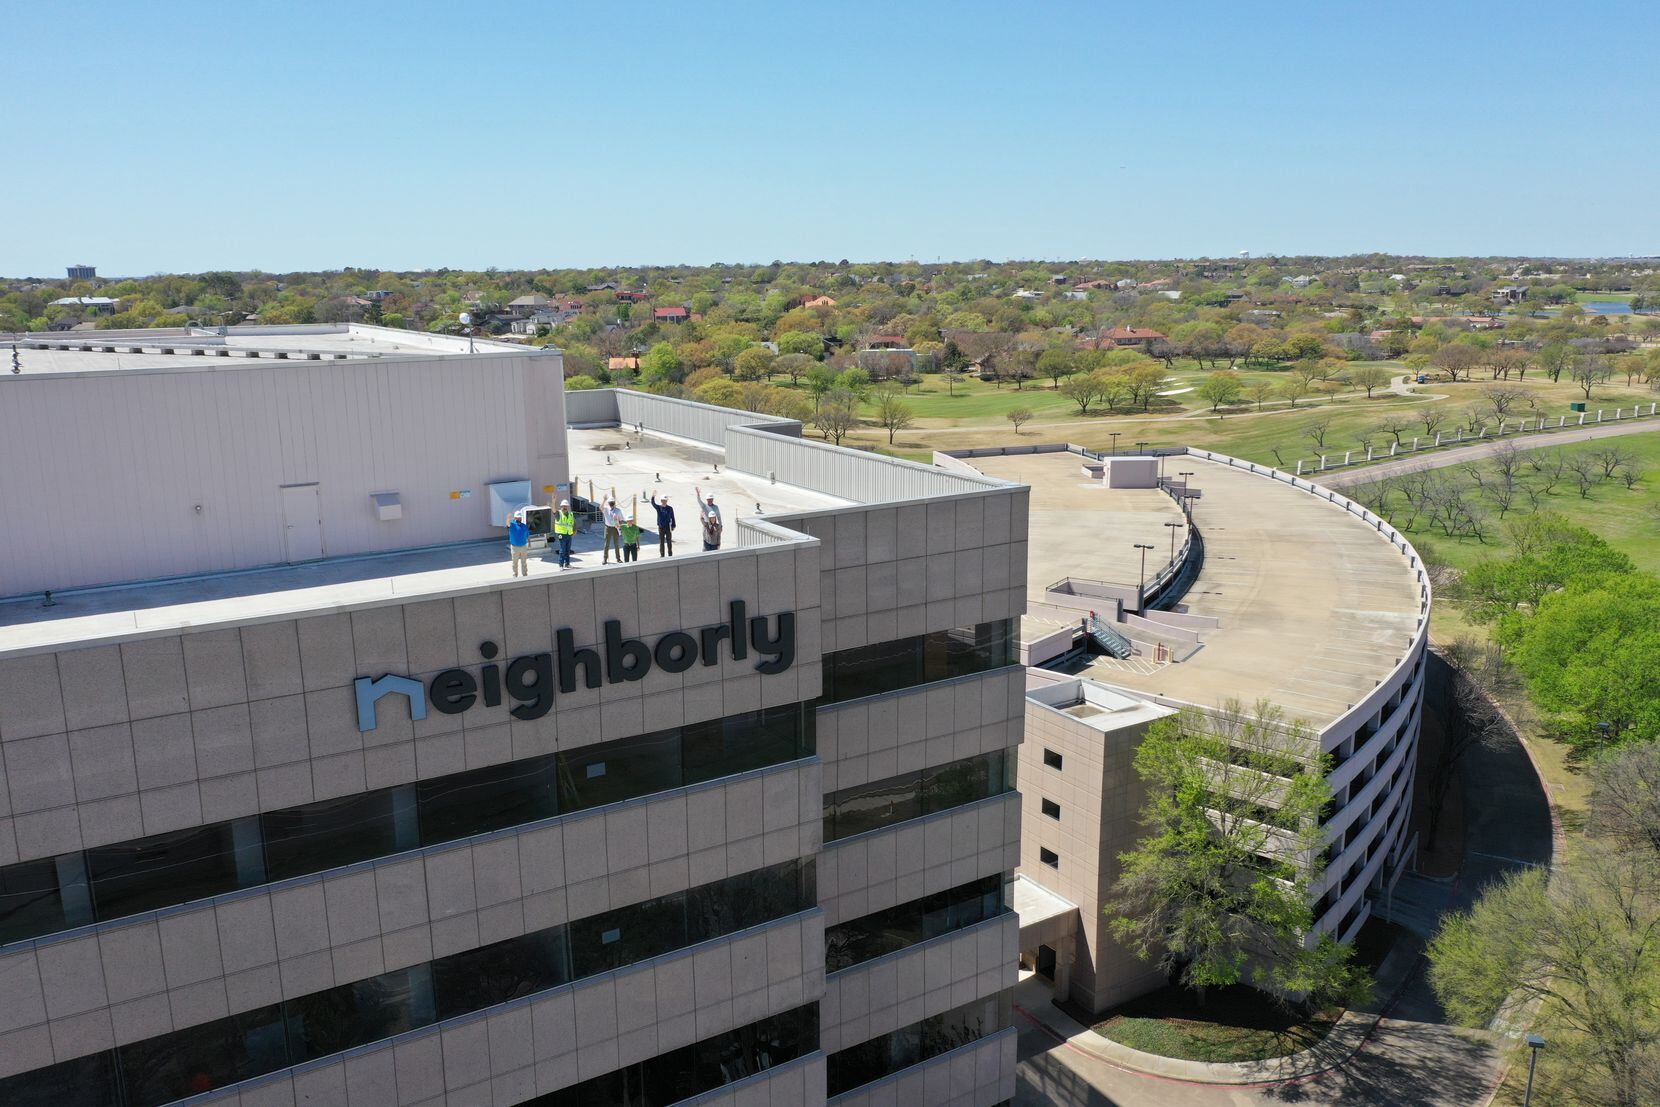 Waco-based Neighborly opened a second headquarters in Las Colinas in 2020.